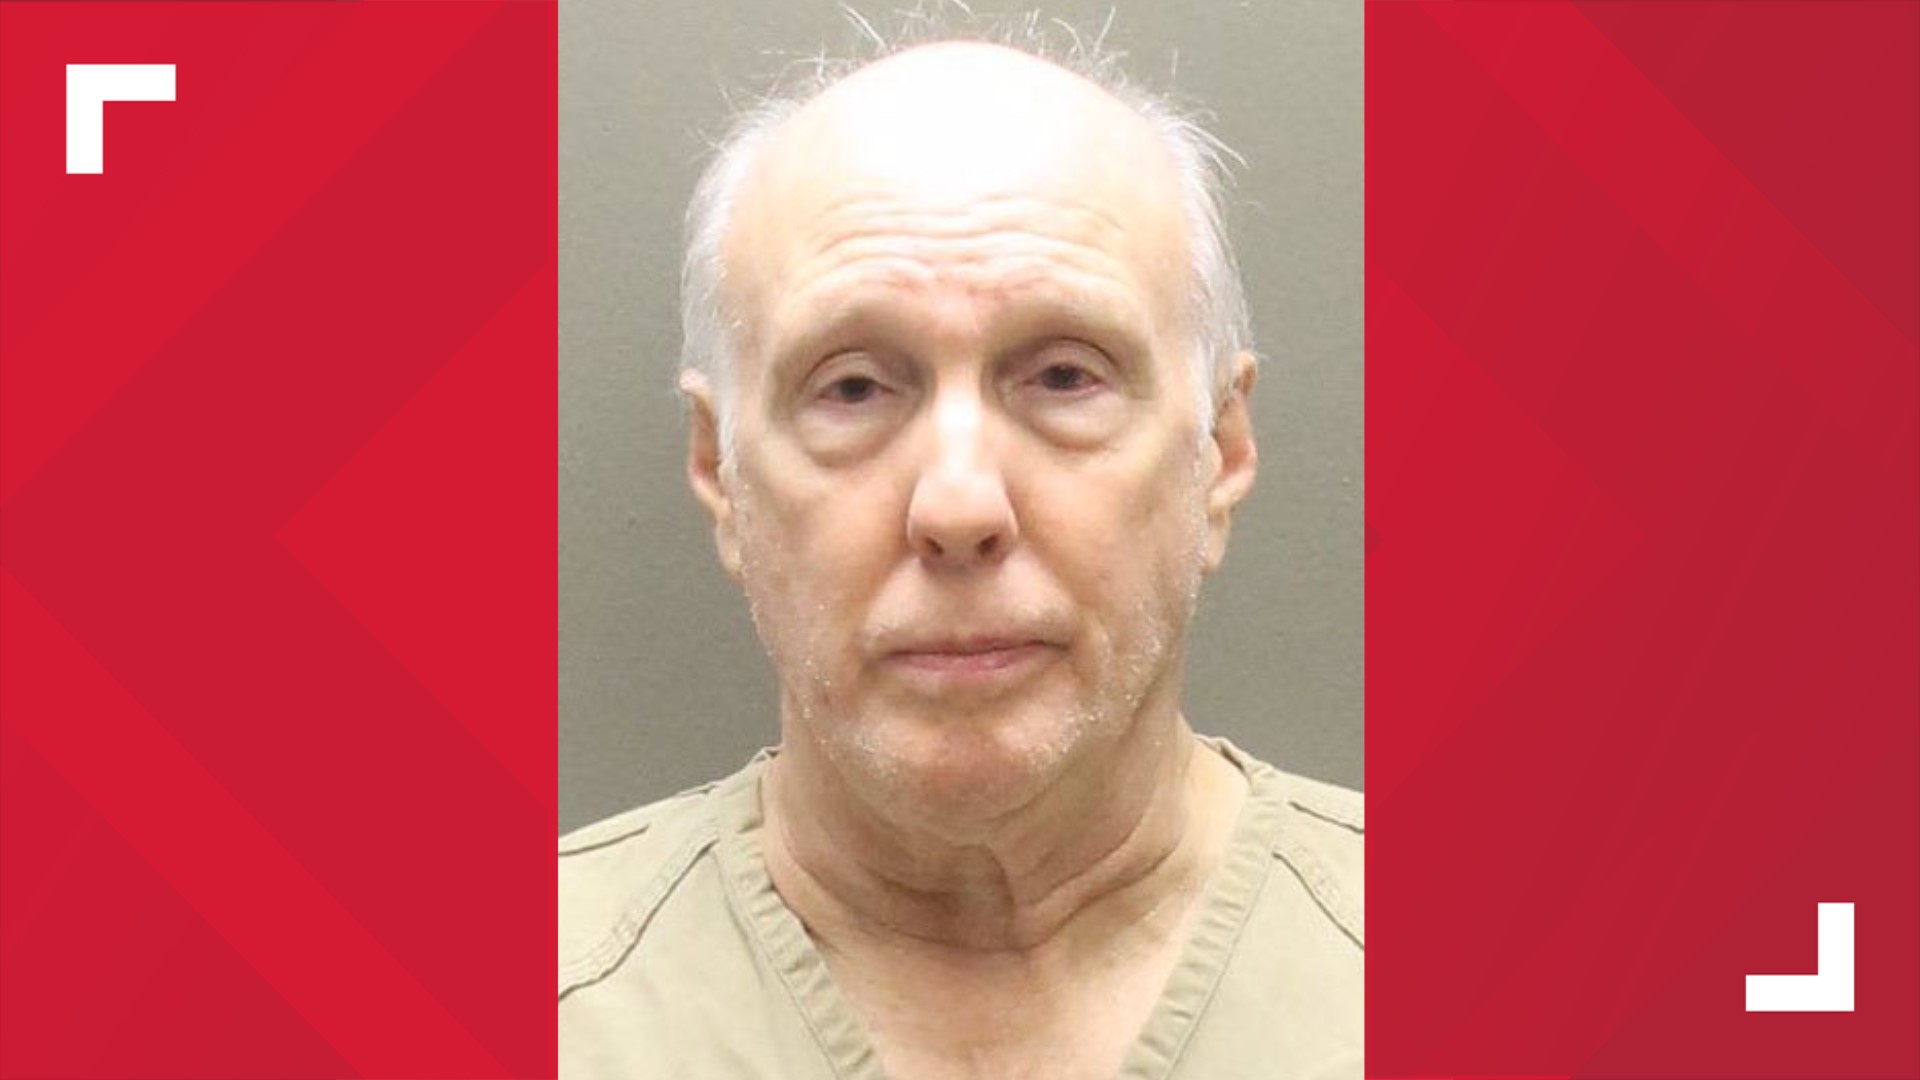 Alan Patton entered a guilty plea to one count of pandering sexually-oriented material involving a minor on Wednesday.